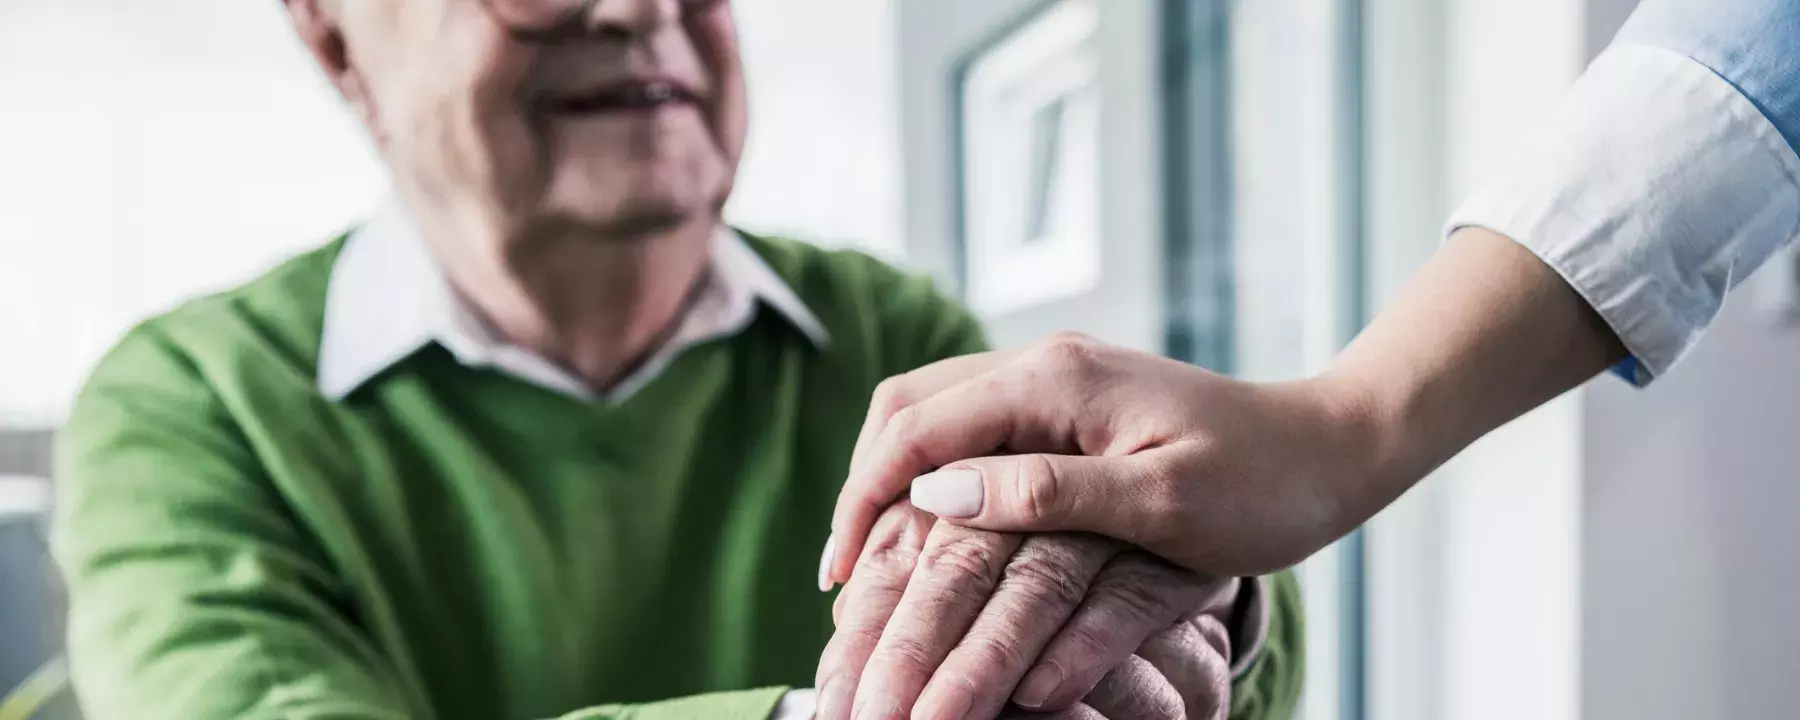 helping hand for an older person - 1800*720